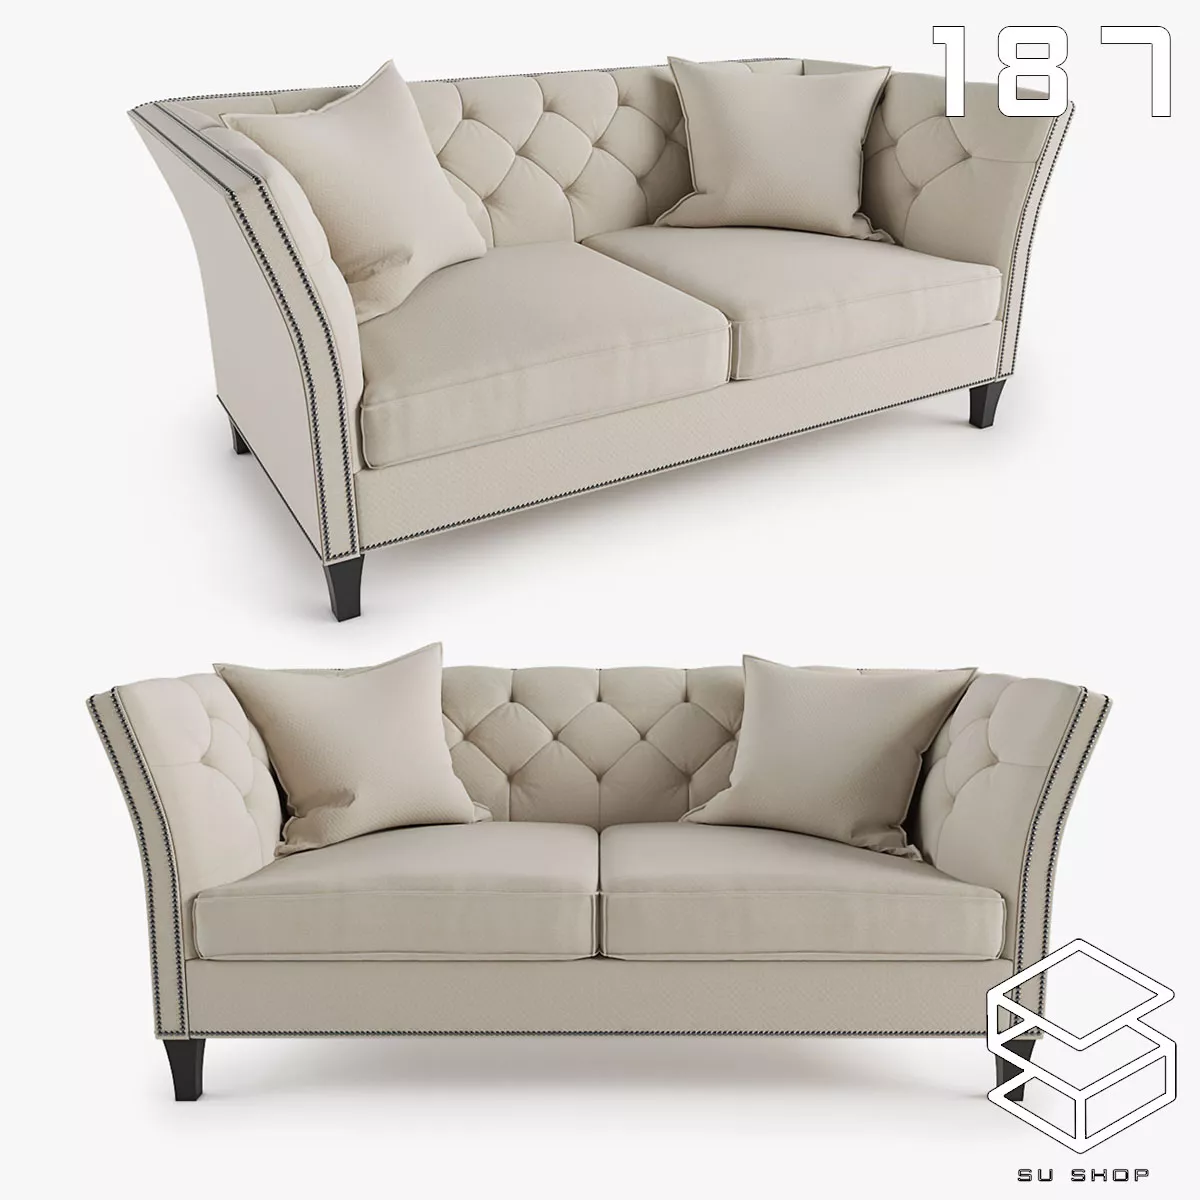 MODERN SOFA - SKETCHUP 3D MODEL - VRAY OR ENSCAPE - ID13482